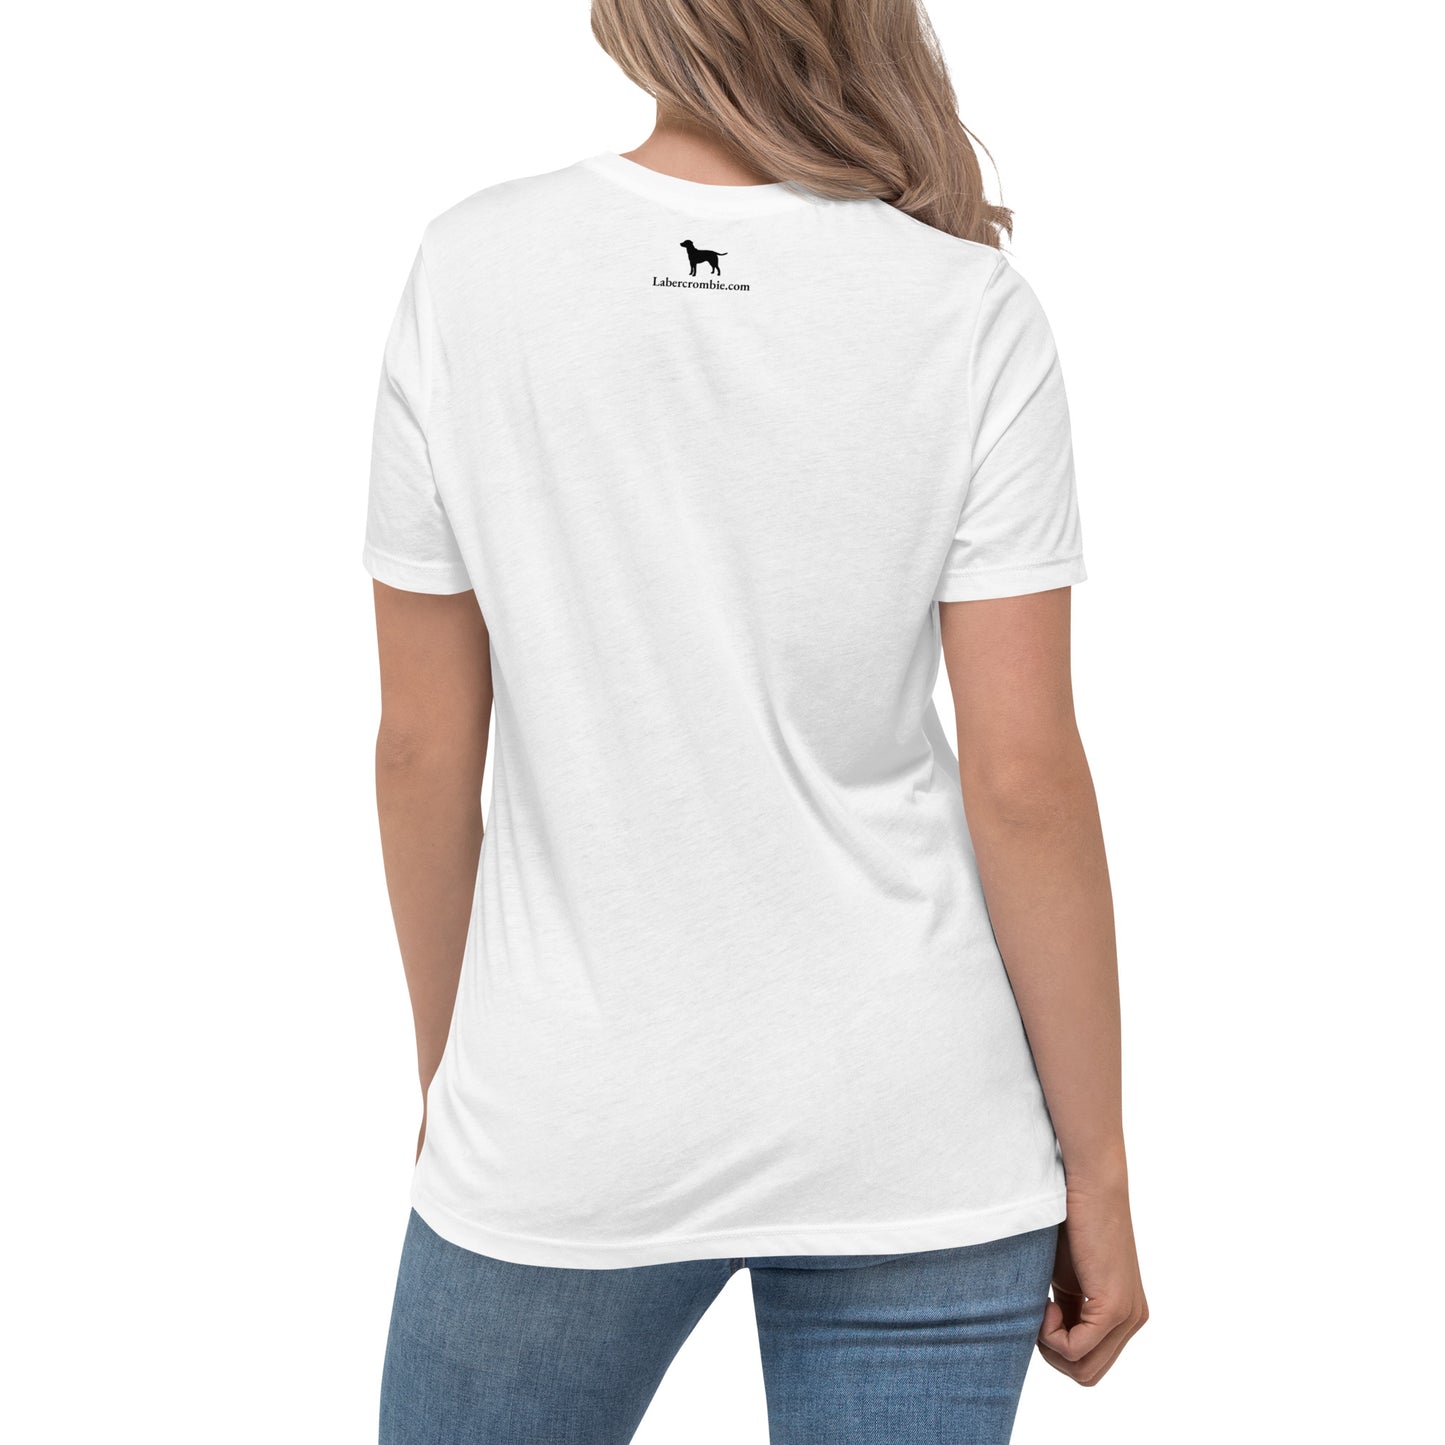 Woofle House Women's Relaxed T-Shirt